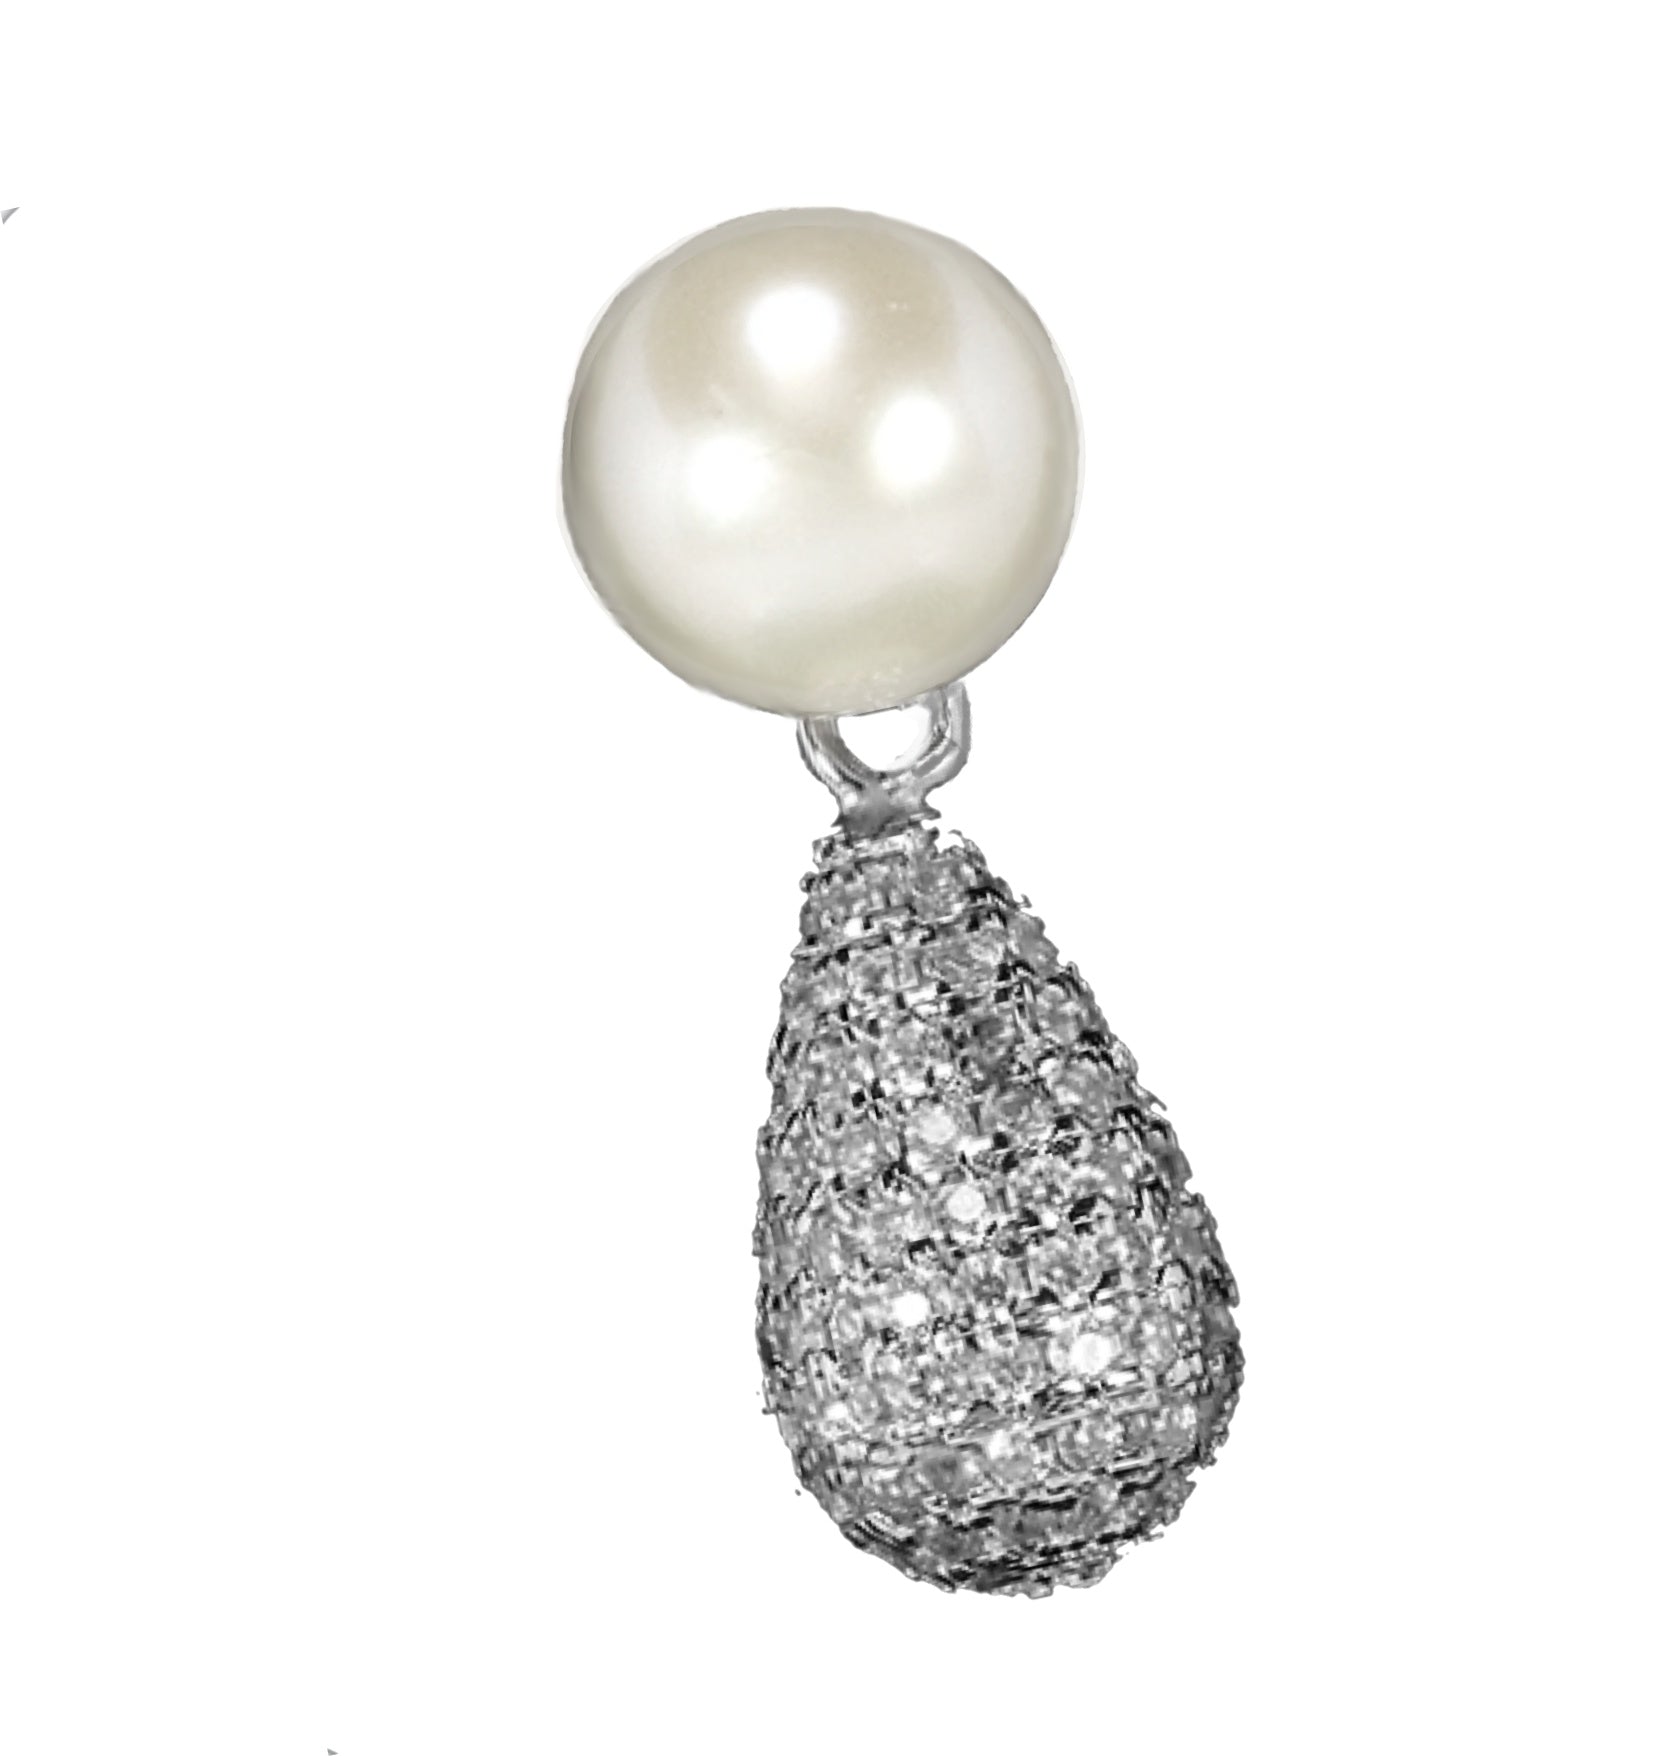 Dainty Natural White Pearl, White Cubic Zirconia Solid .925 Sterling Silver Pendant & Earrings